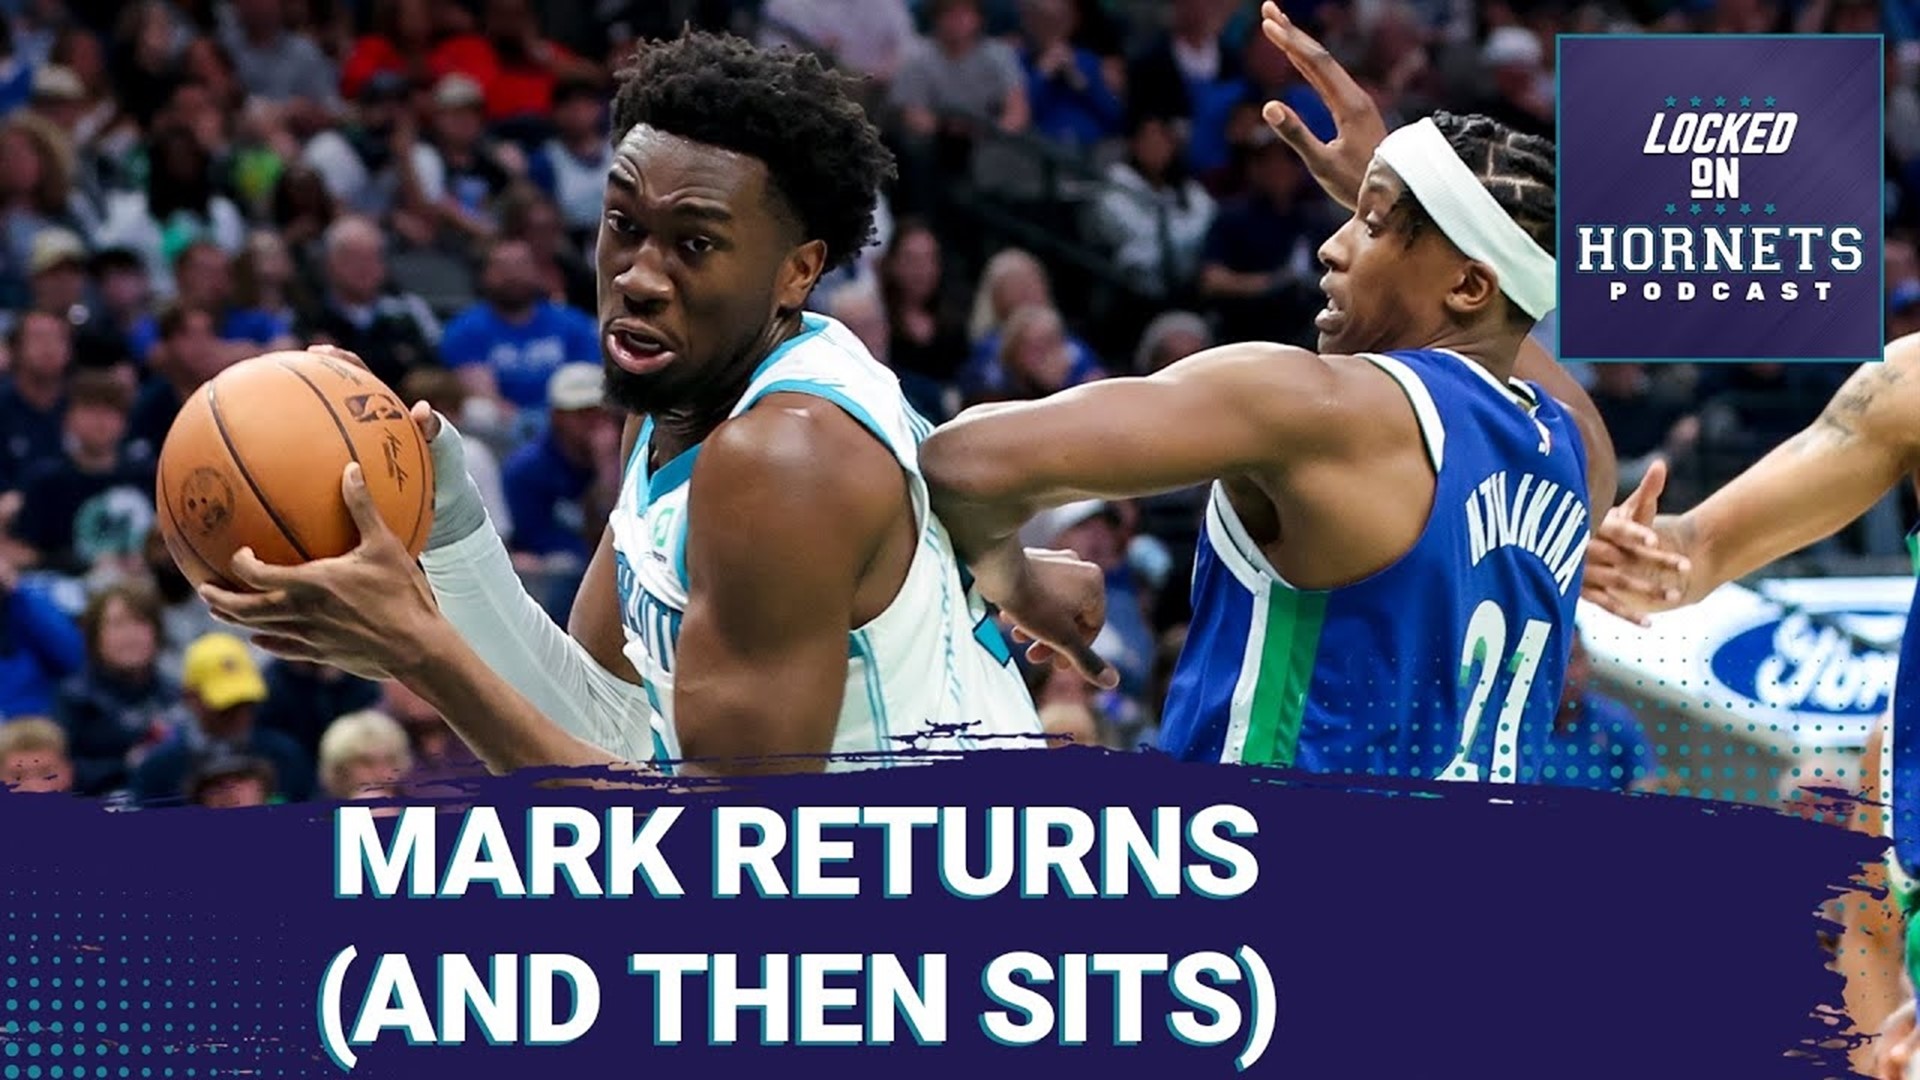 Mark Williams returned from a thumb injury over the weekend and performed well against the Mavericks.